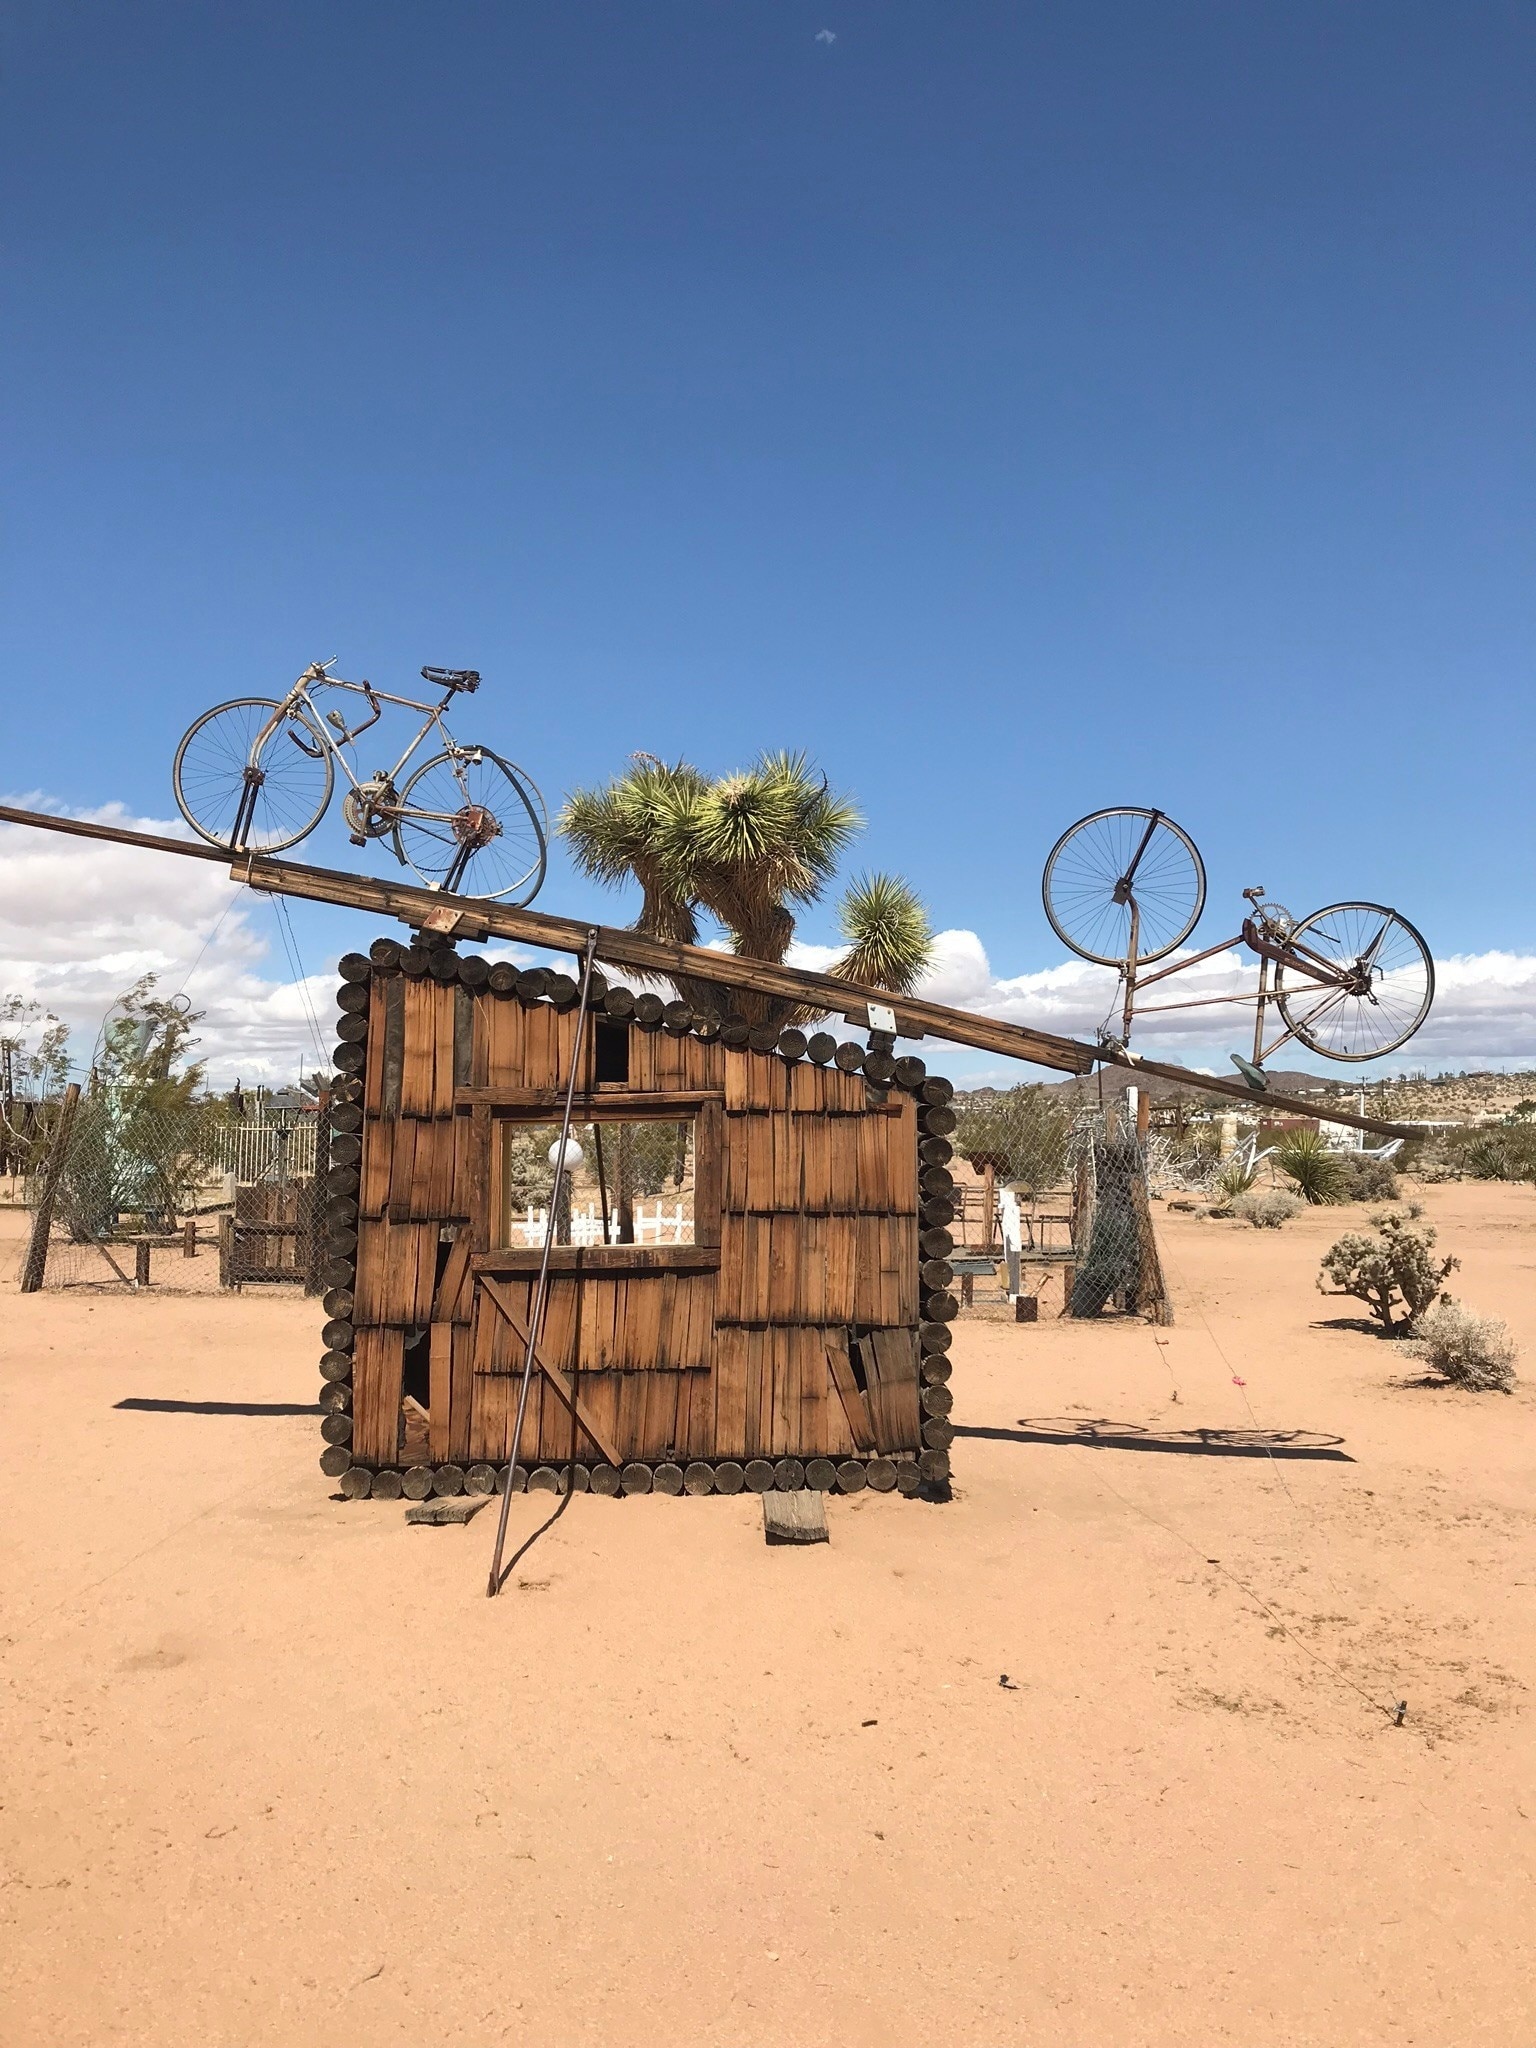 Just outside Joshua Tree National Park, the Noah Purifoy Foundation houses some of the quirkiest desert art installations I have ever seen. It's free to visit (donations accepted) and definitely worth a visit if you're in the area! #JoshuaTree #Desert #California 